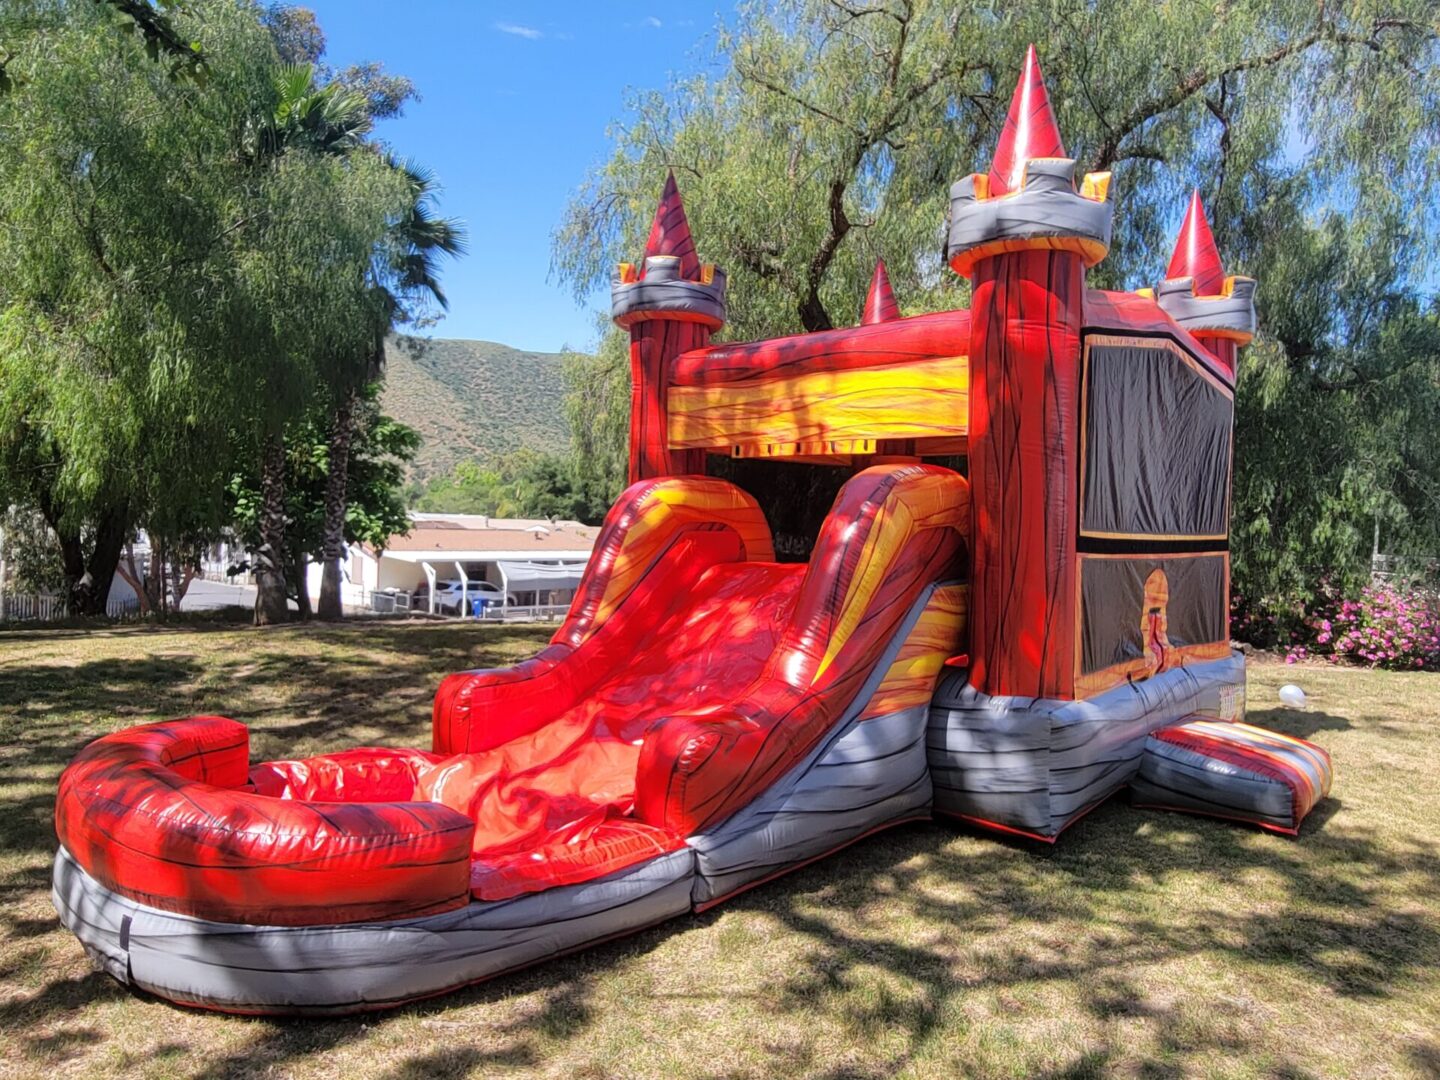 A red and silver inflatable castle with slide.